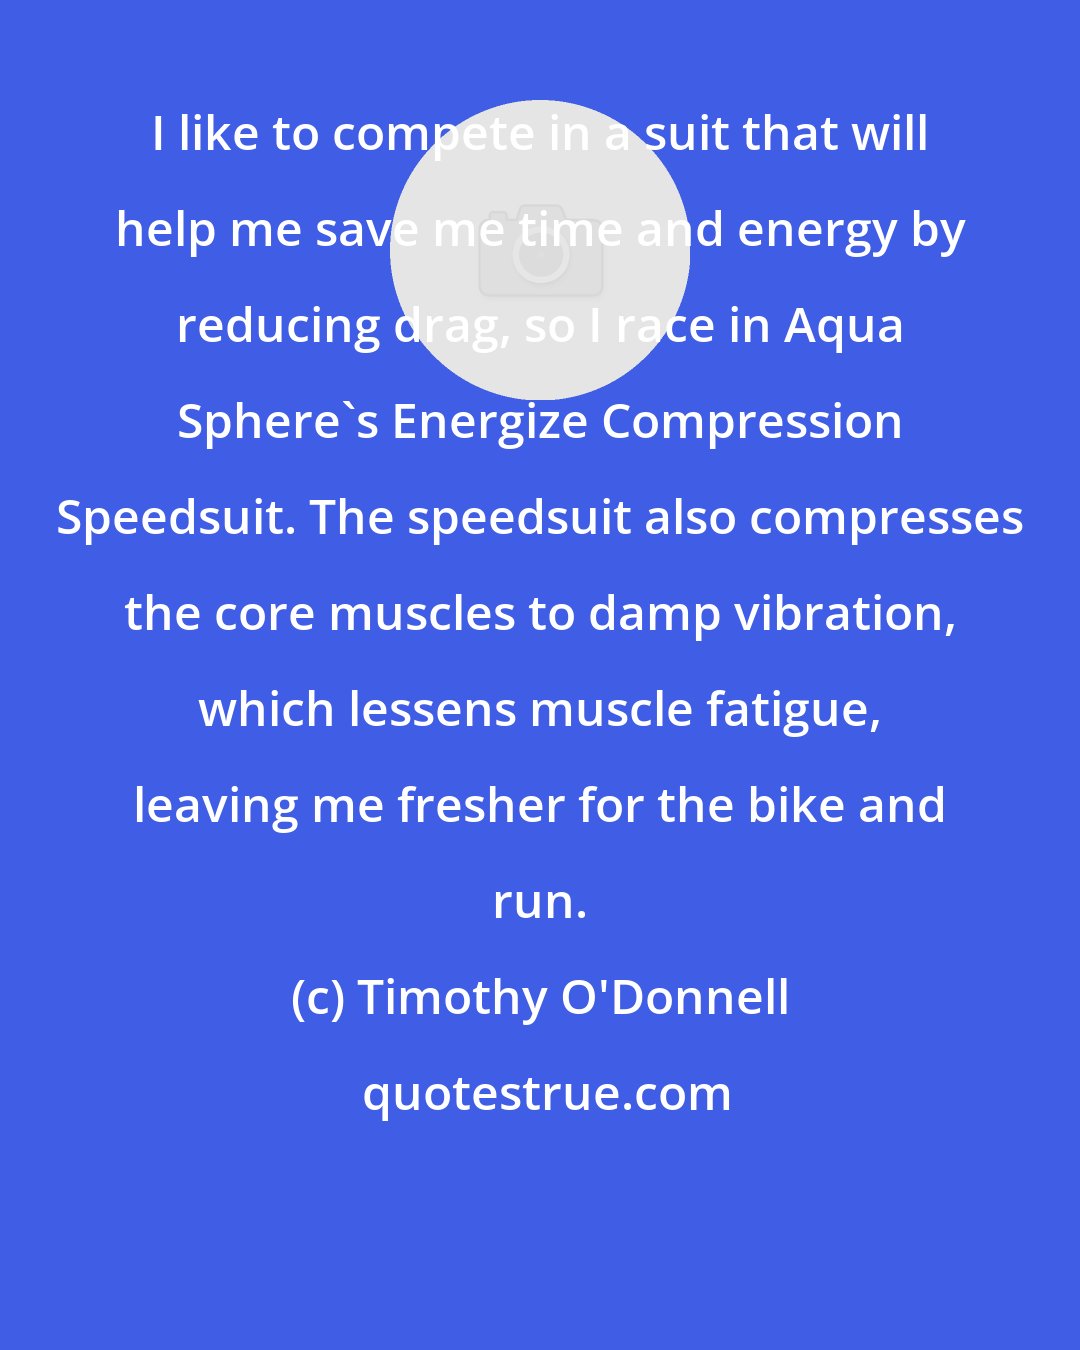 Timothy O'Donnell: I like to compete in a suit that will help me save me time and energy by reducing drag, so I race in Aqua Sphere's Energize Compression Speedsuit. The speedsuit also compresses the core muscles to damp vibration, which lessens muscle fatigue, leaving me fresher for the bike and run.